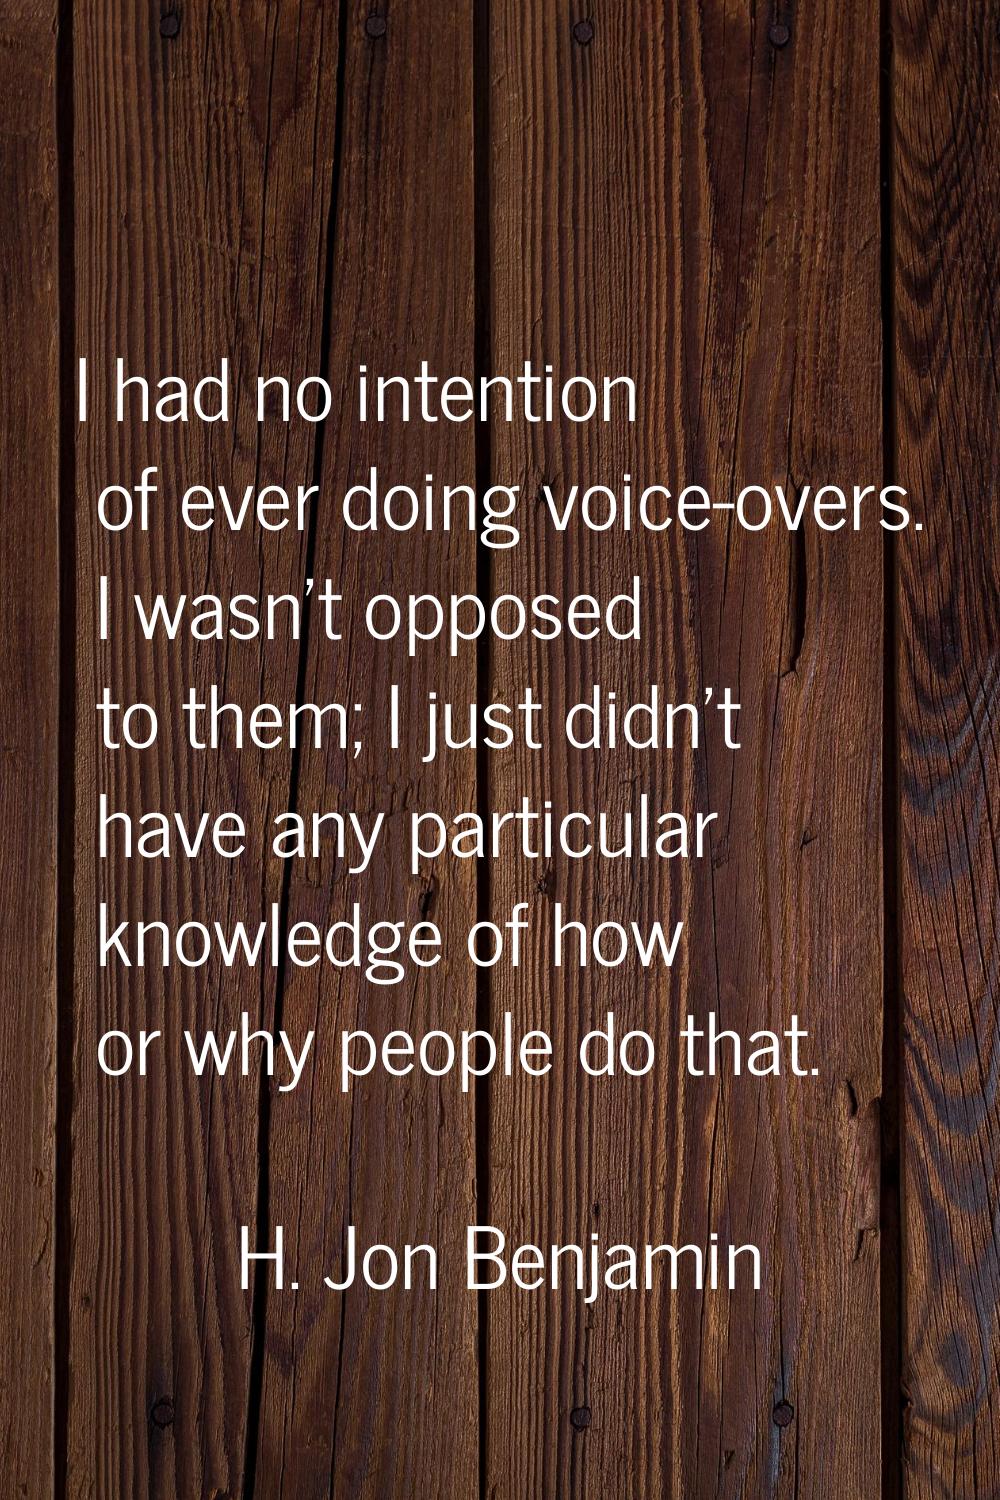 I had no intention of ever doing voice-overs. I wasn't opposed to them; I just didn't have any part